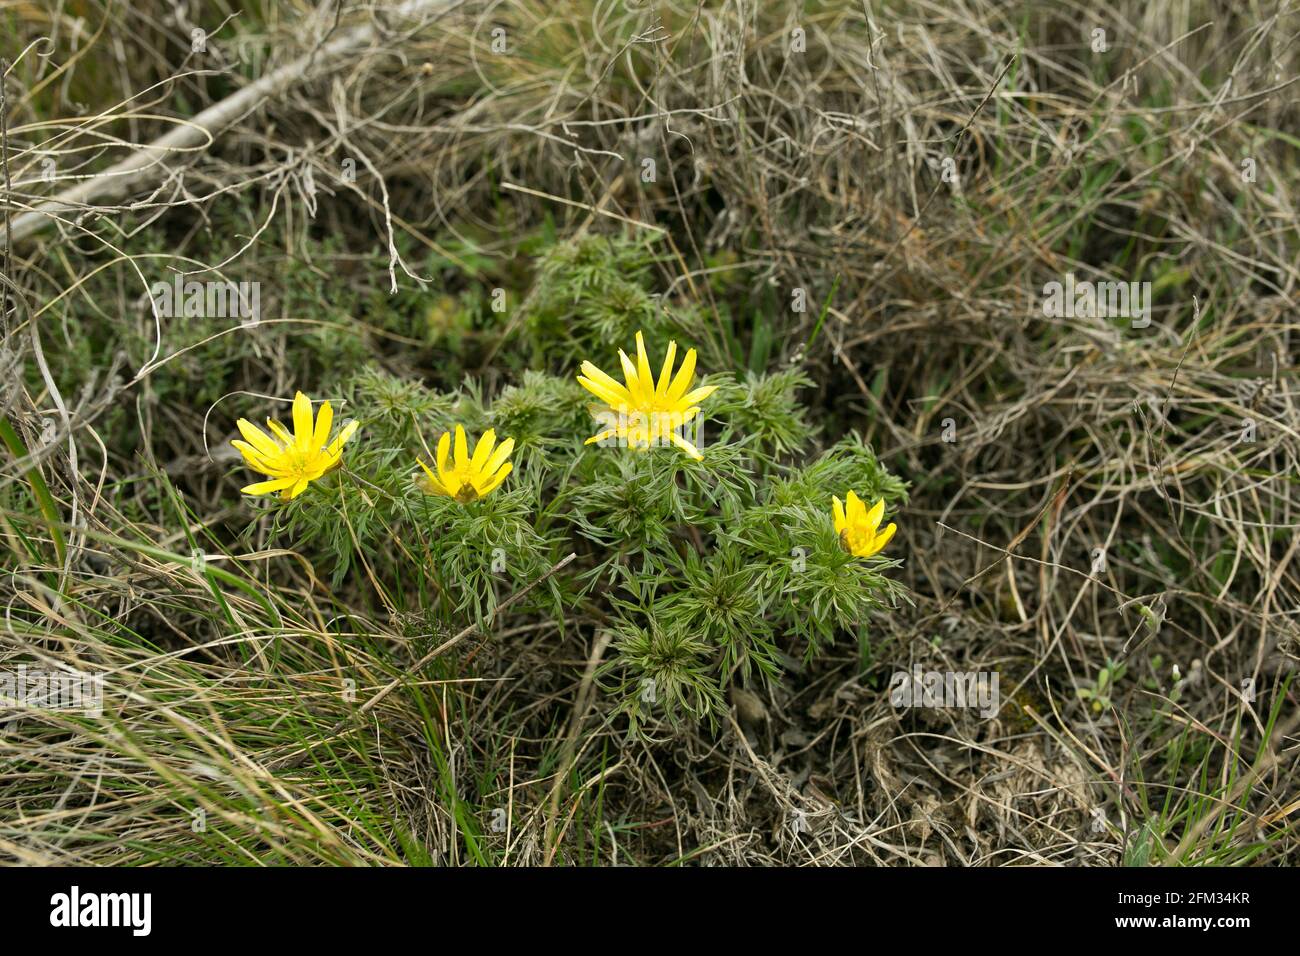 Spring adonis flower in the fields and hills, Ukraine. The pheasant's eye grows in sheep pasture in early spring. Large yellow flowers. Stock Photo